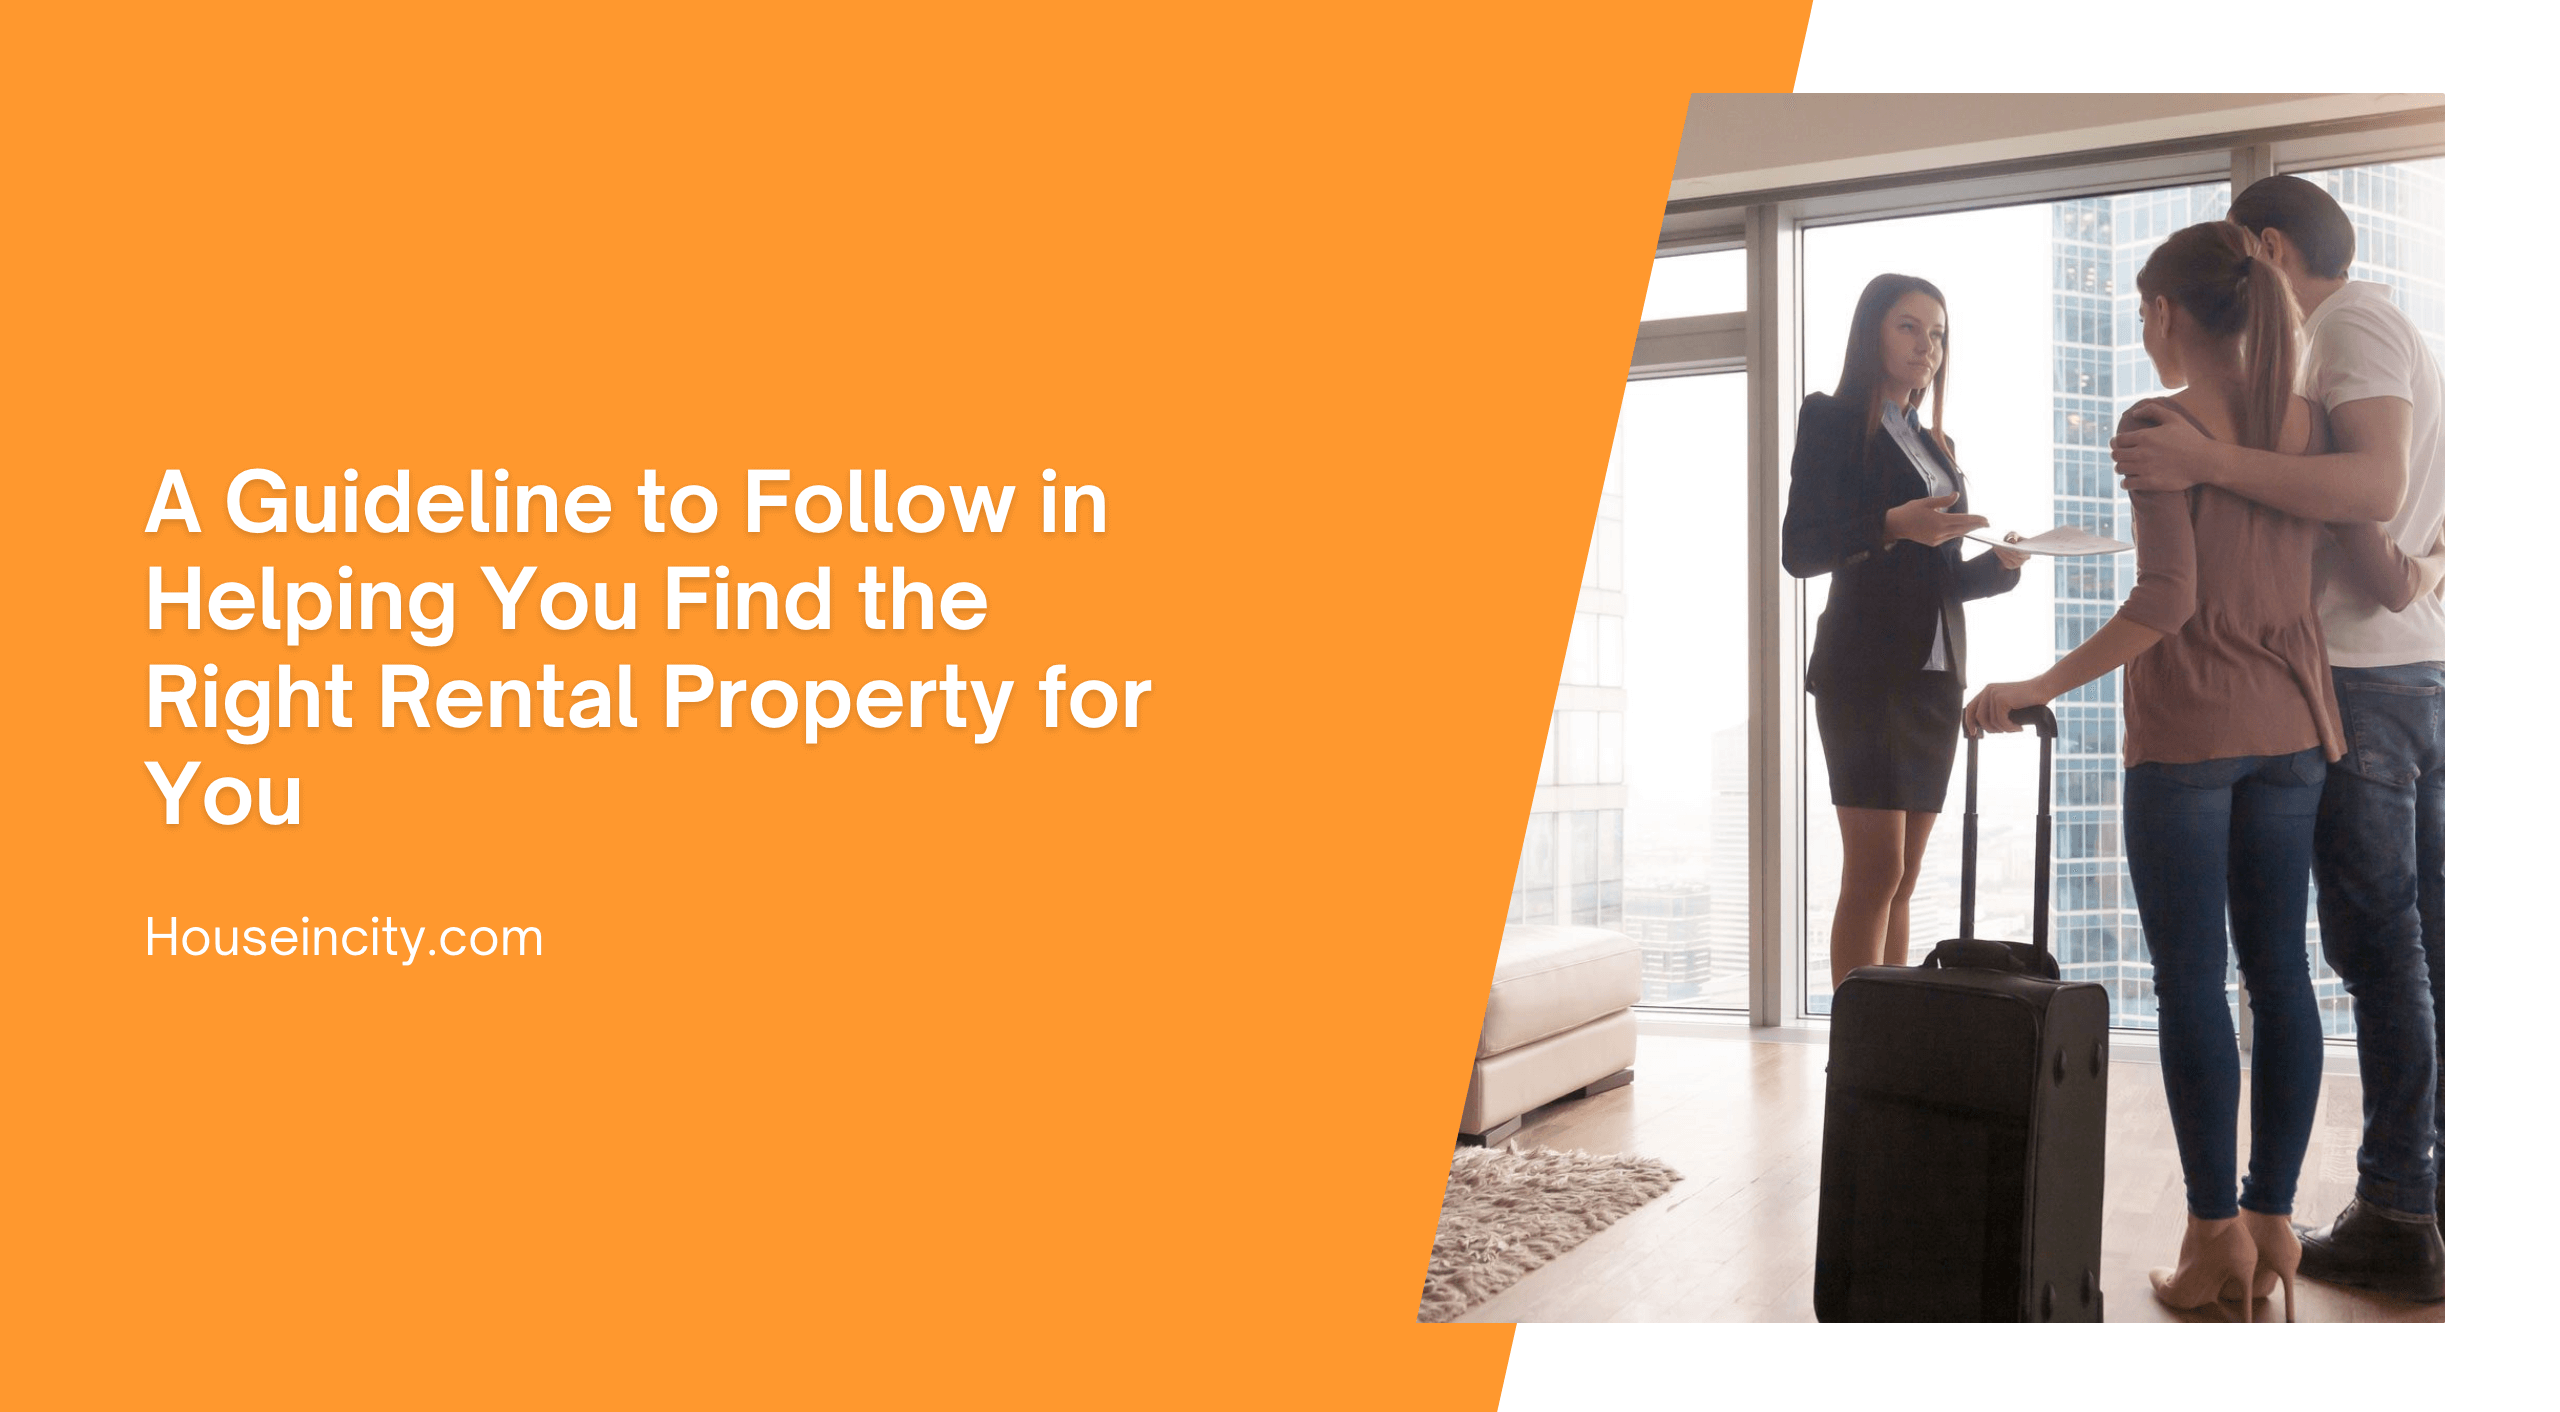 A Guideline to Follow in Helping You Find the Right Rental Property for You